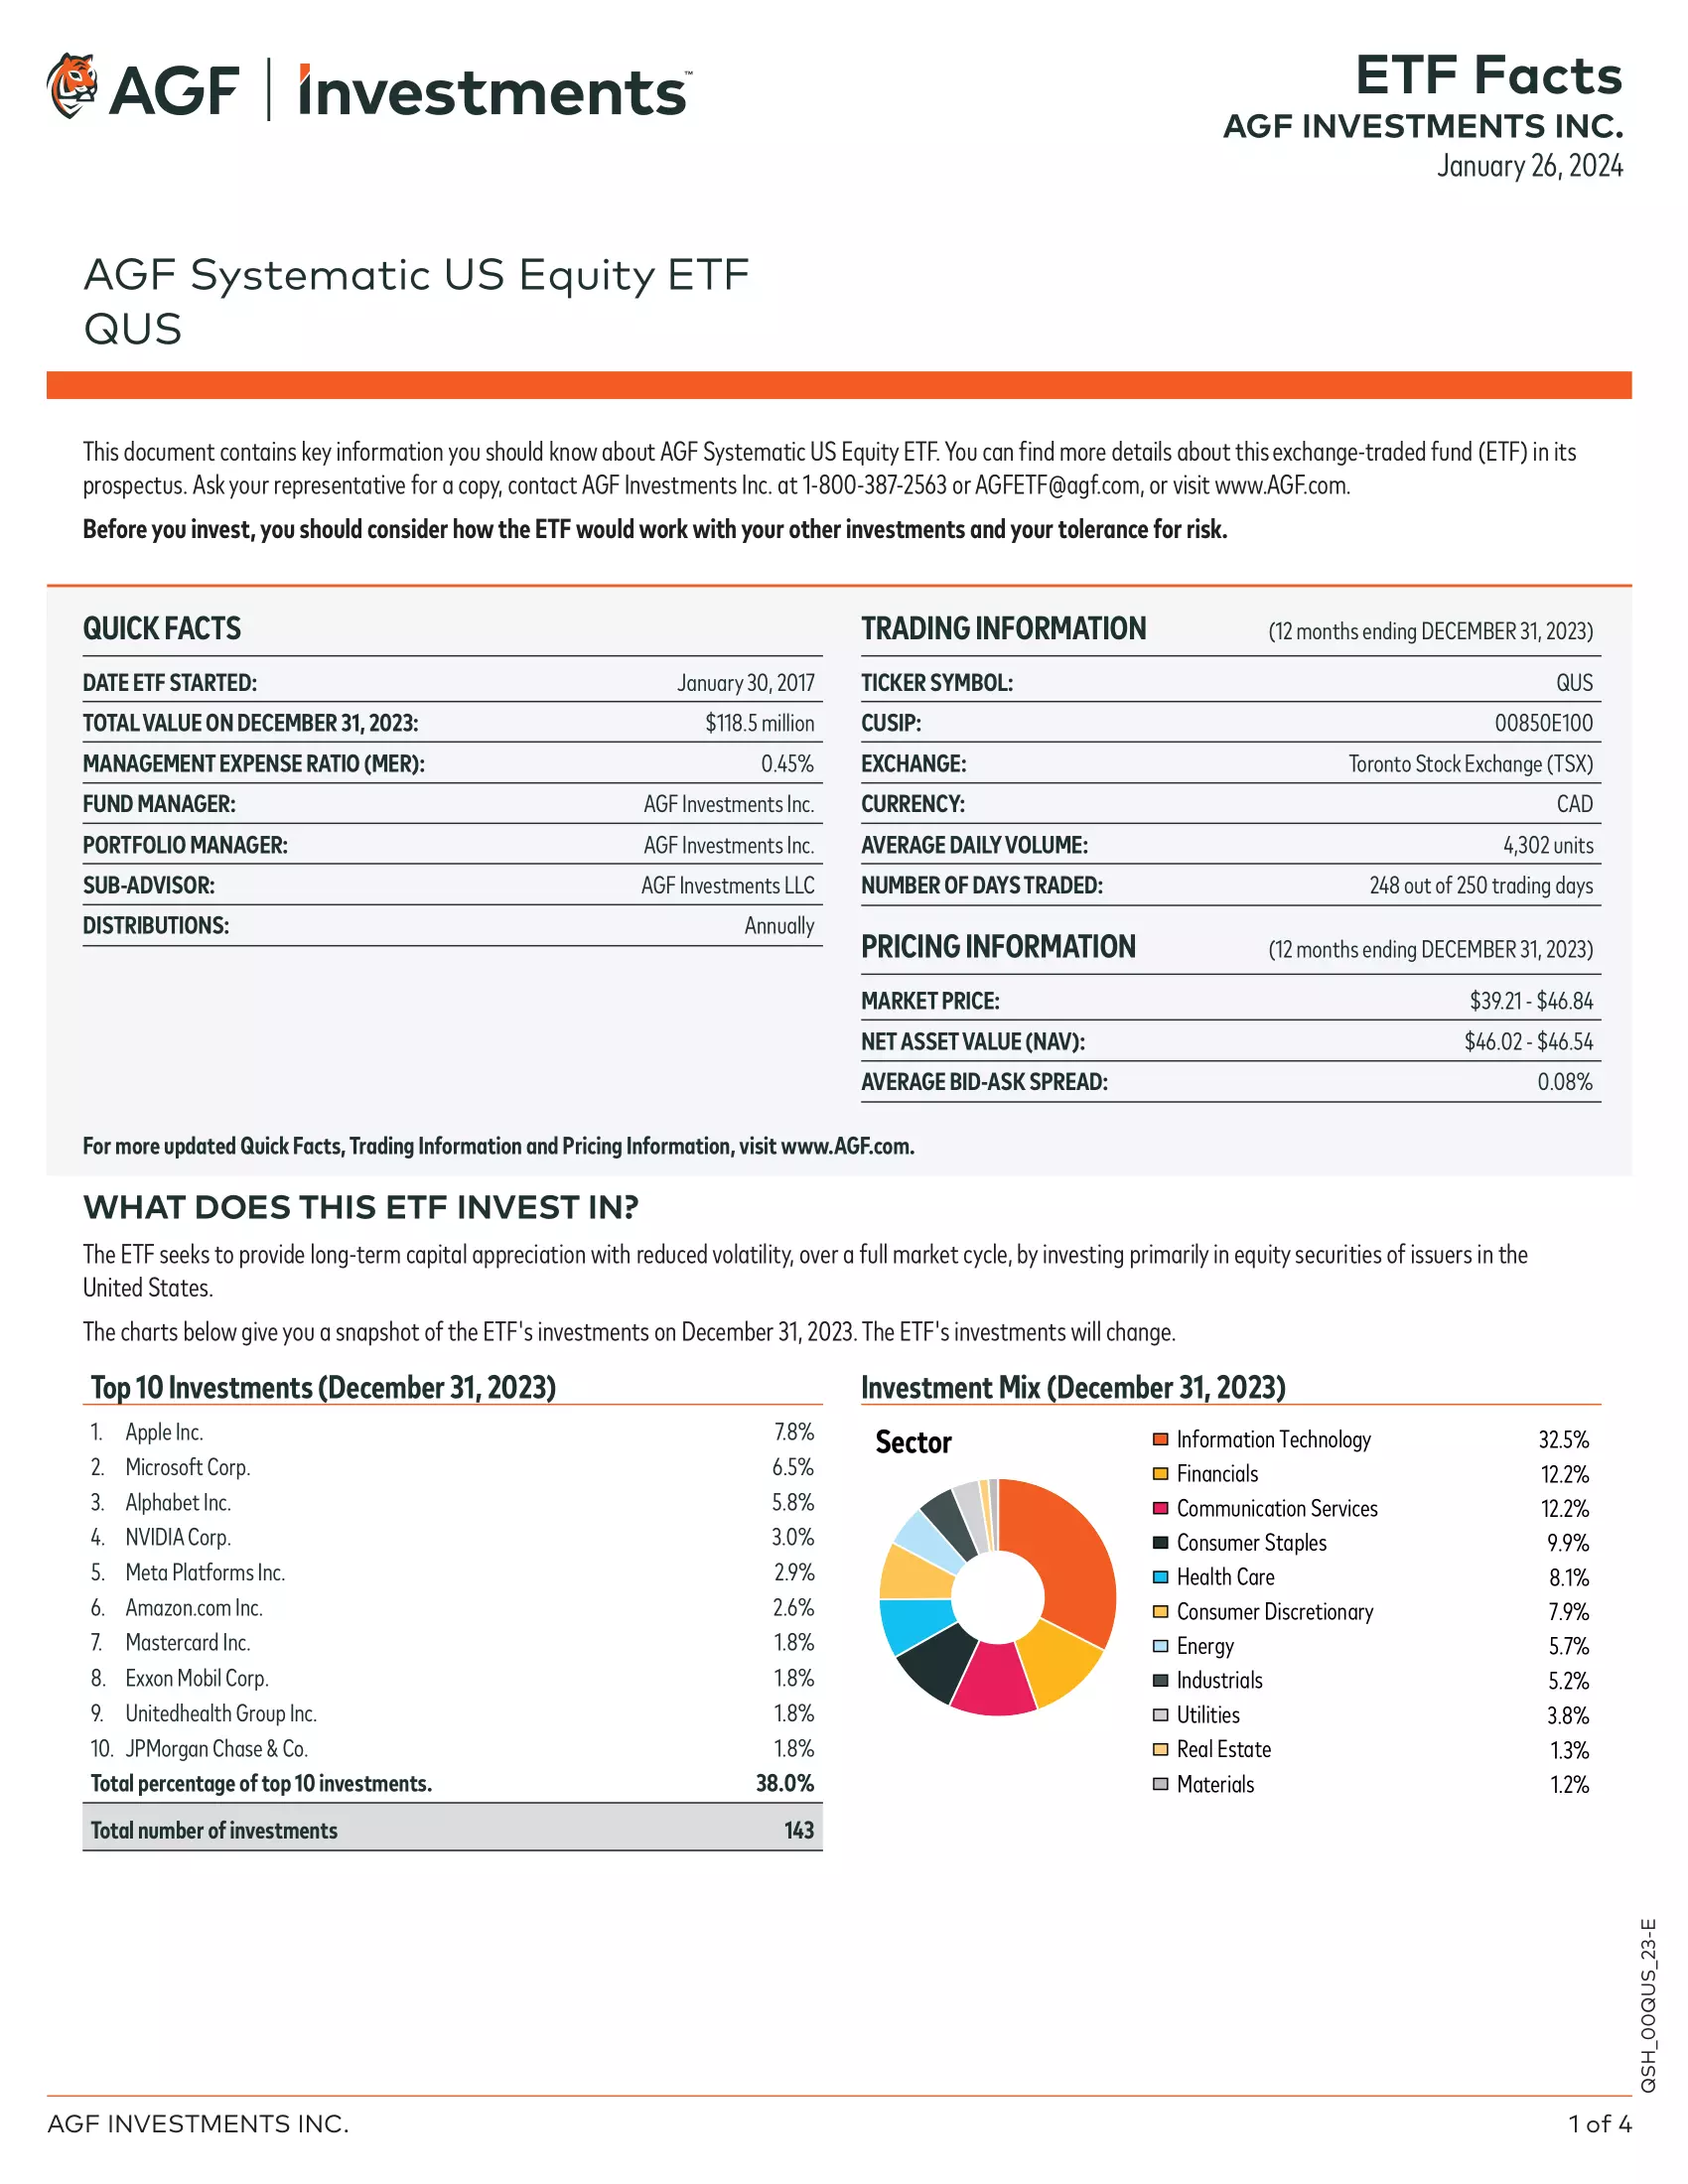 QUS: AGF Systematic U.S. Equity ETF